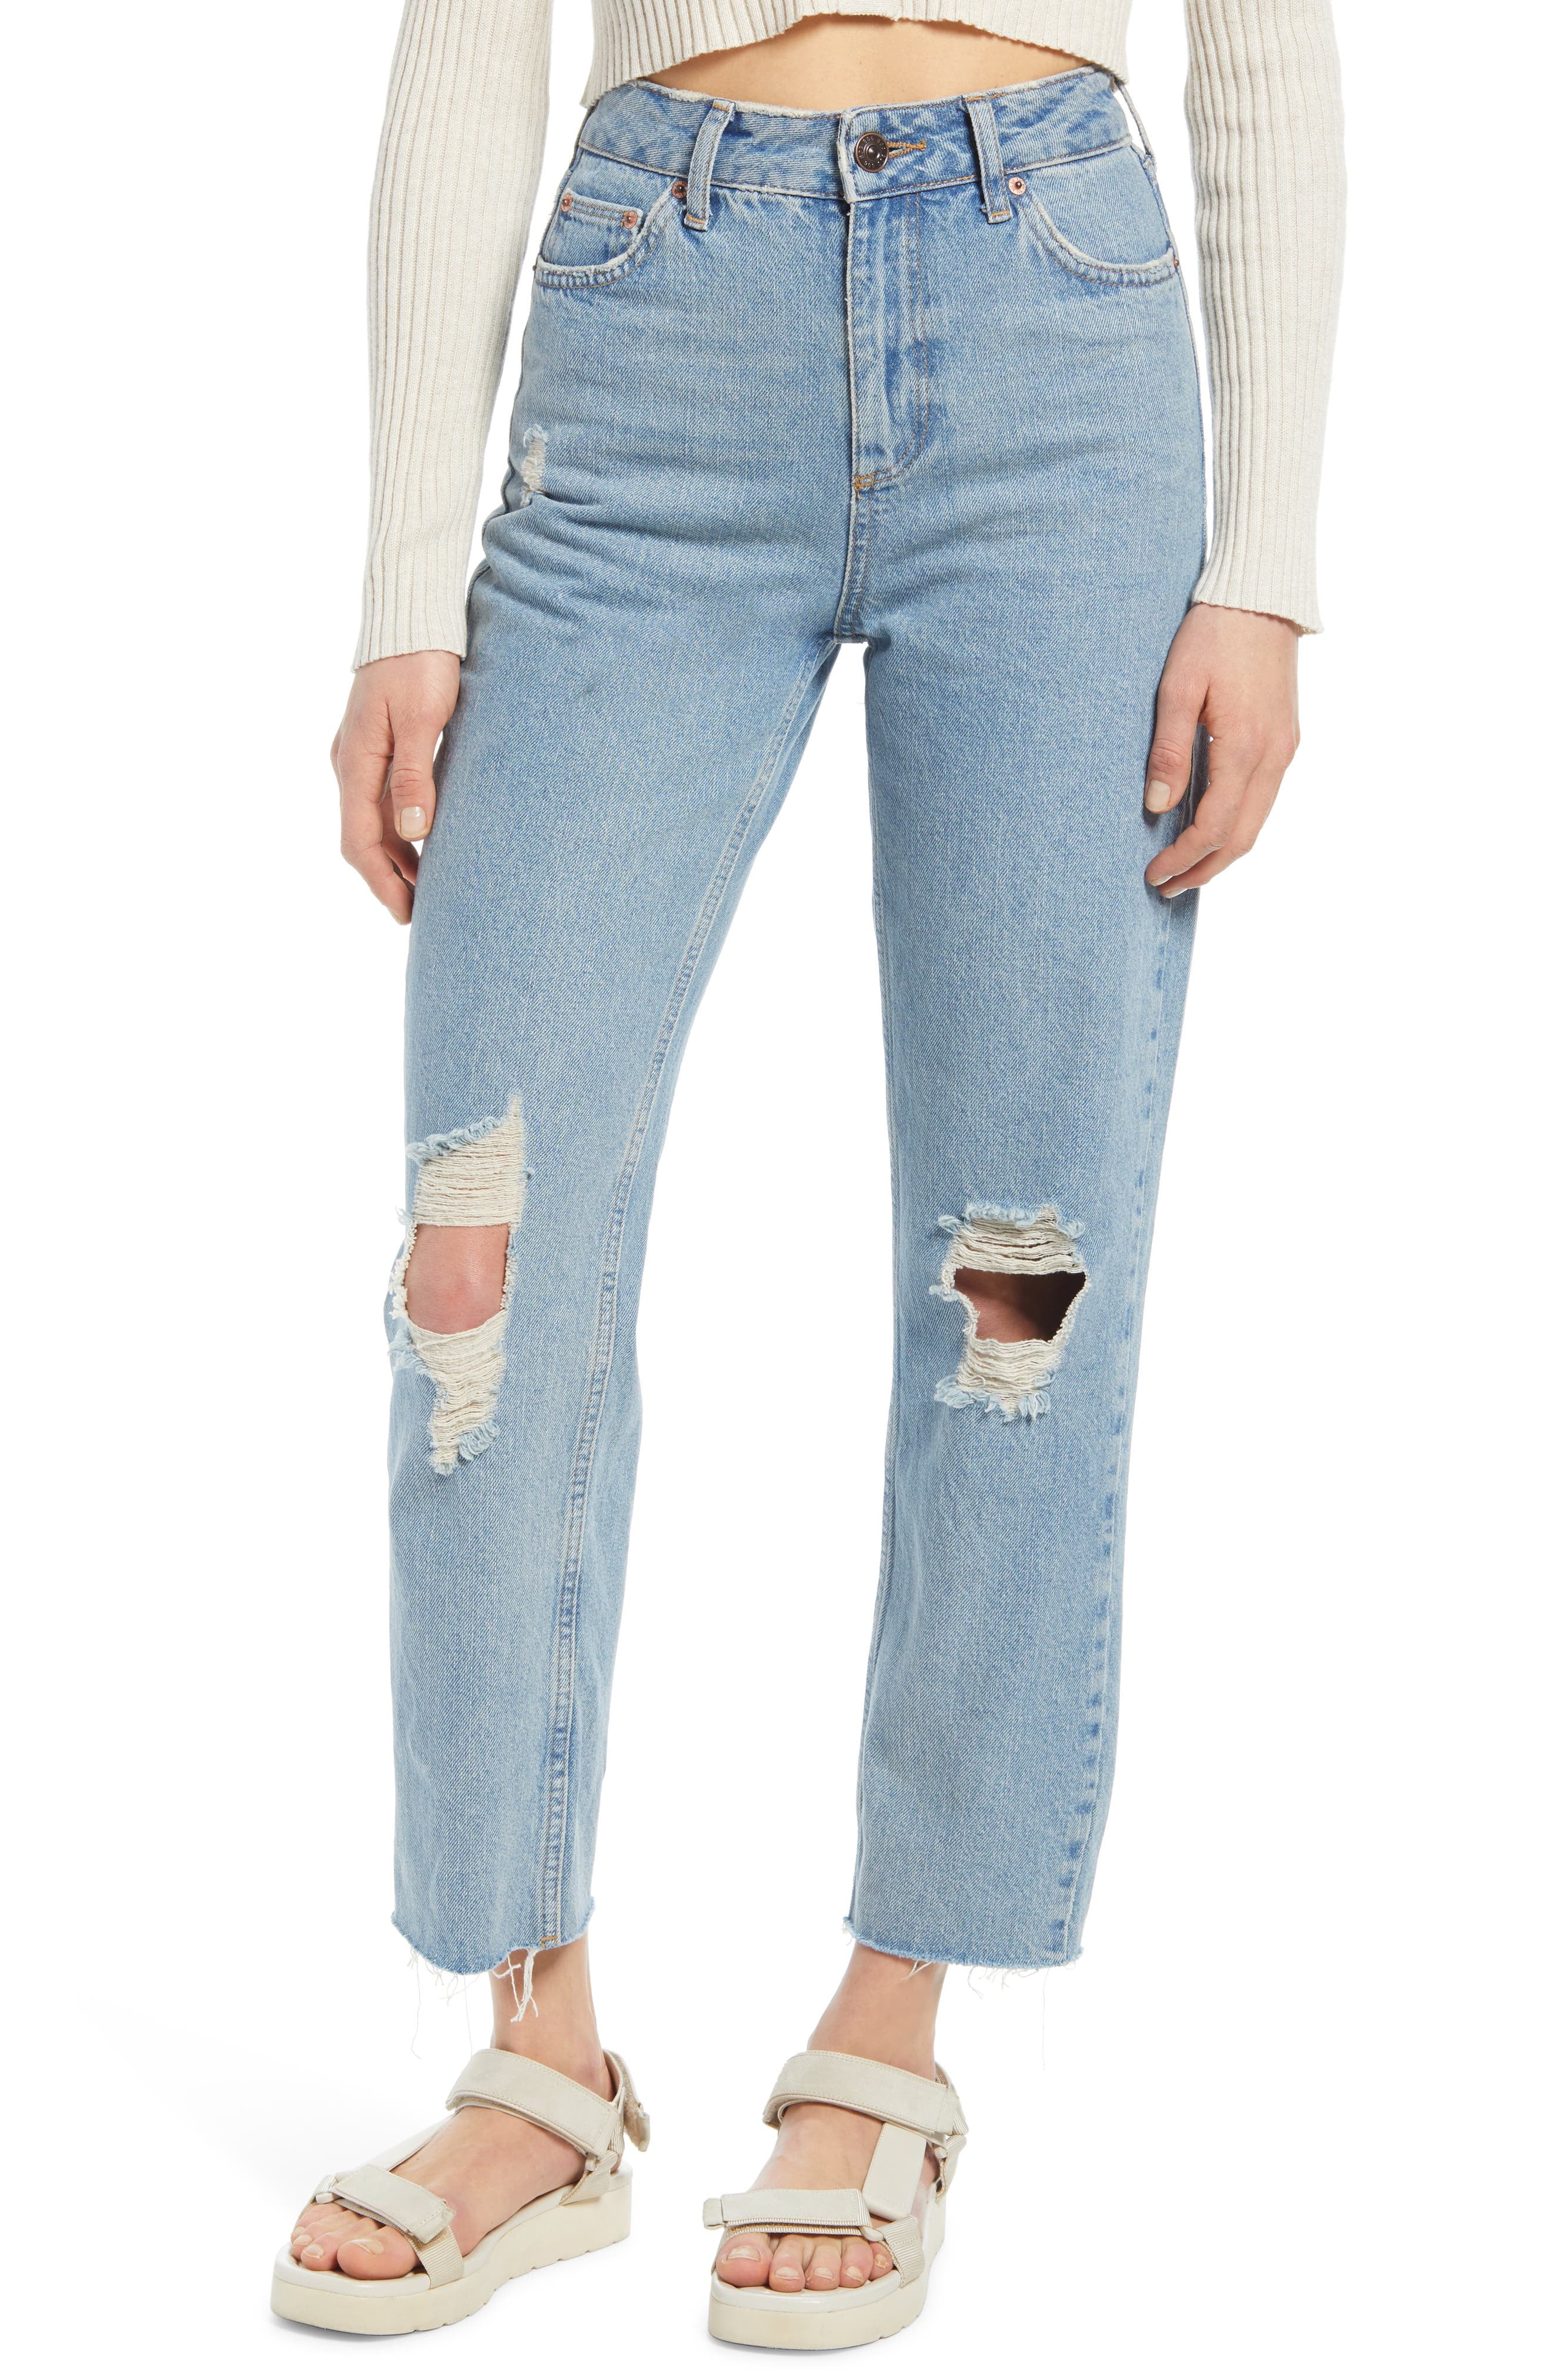 stang impuls Martyr Women's Bdg Urban Outfitters Pax Ripped High Waist Jeans, Size 28 x 32 -  Blue - Walmart.com